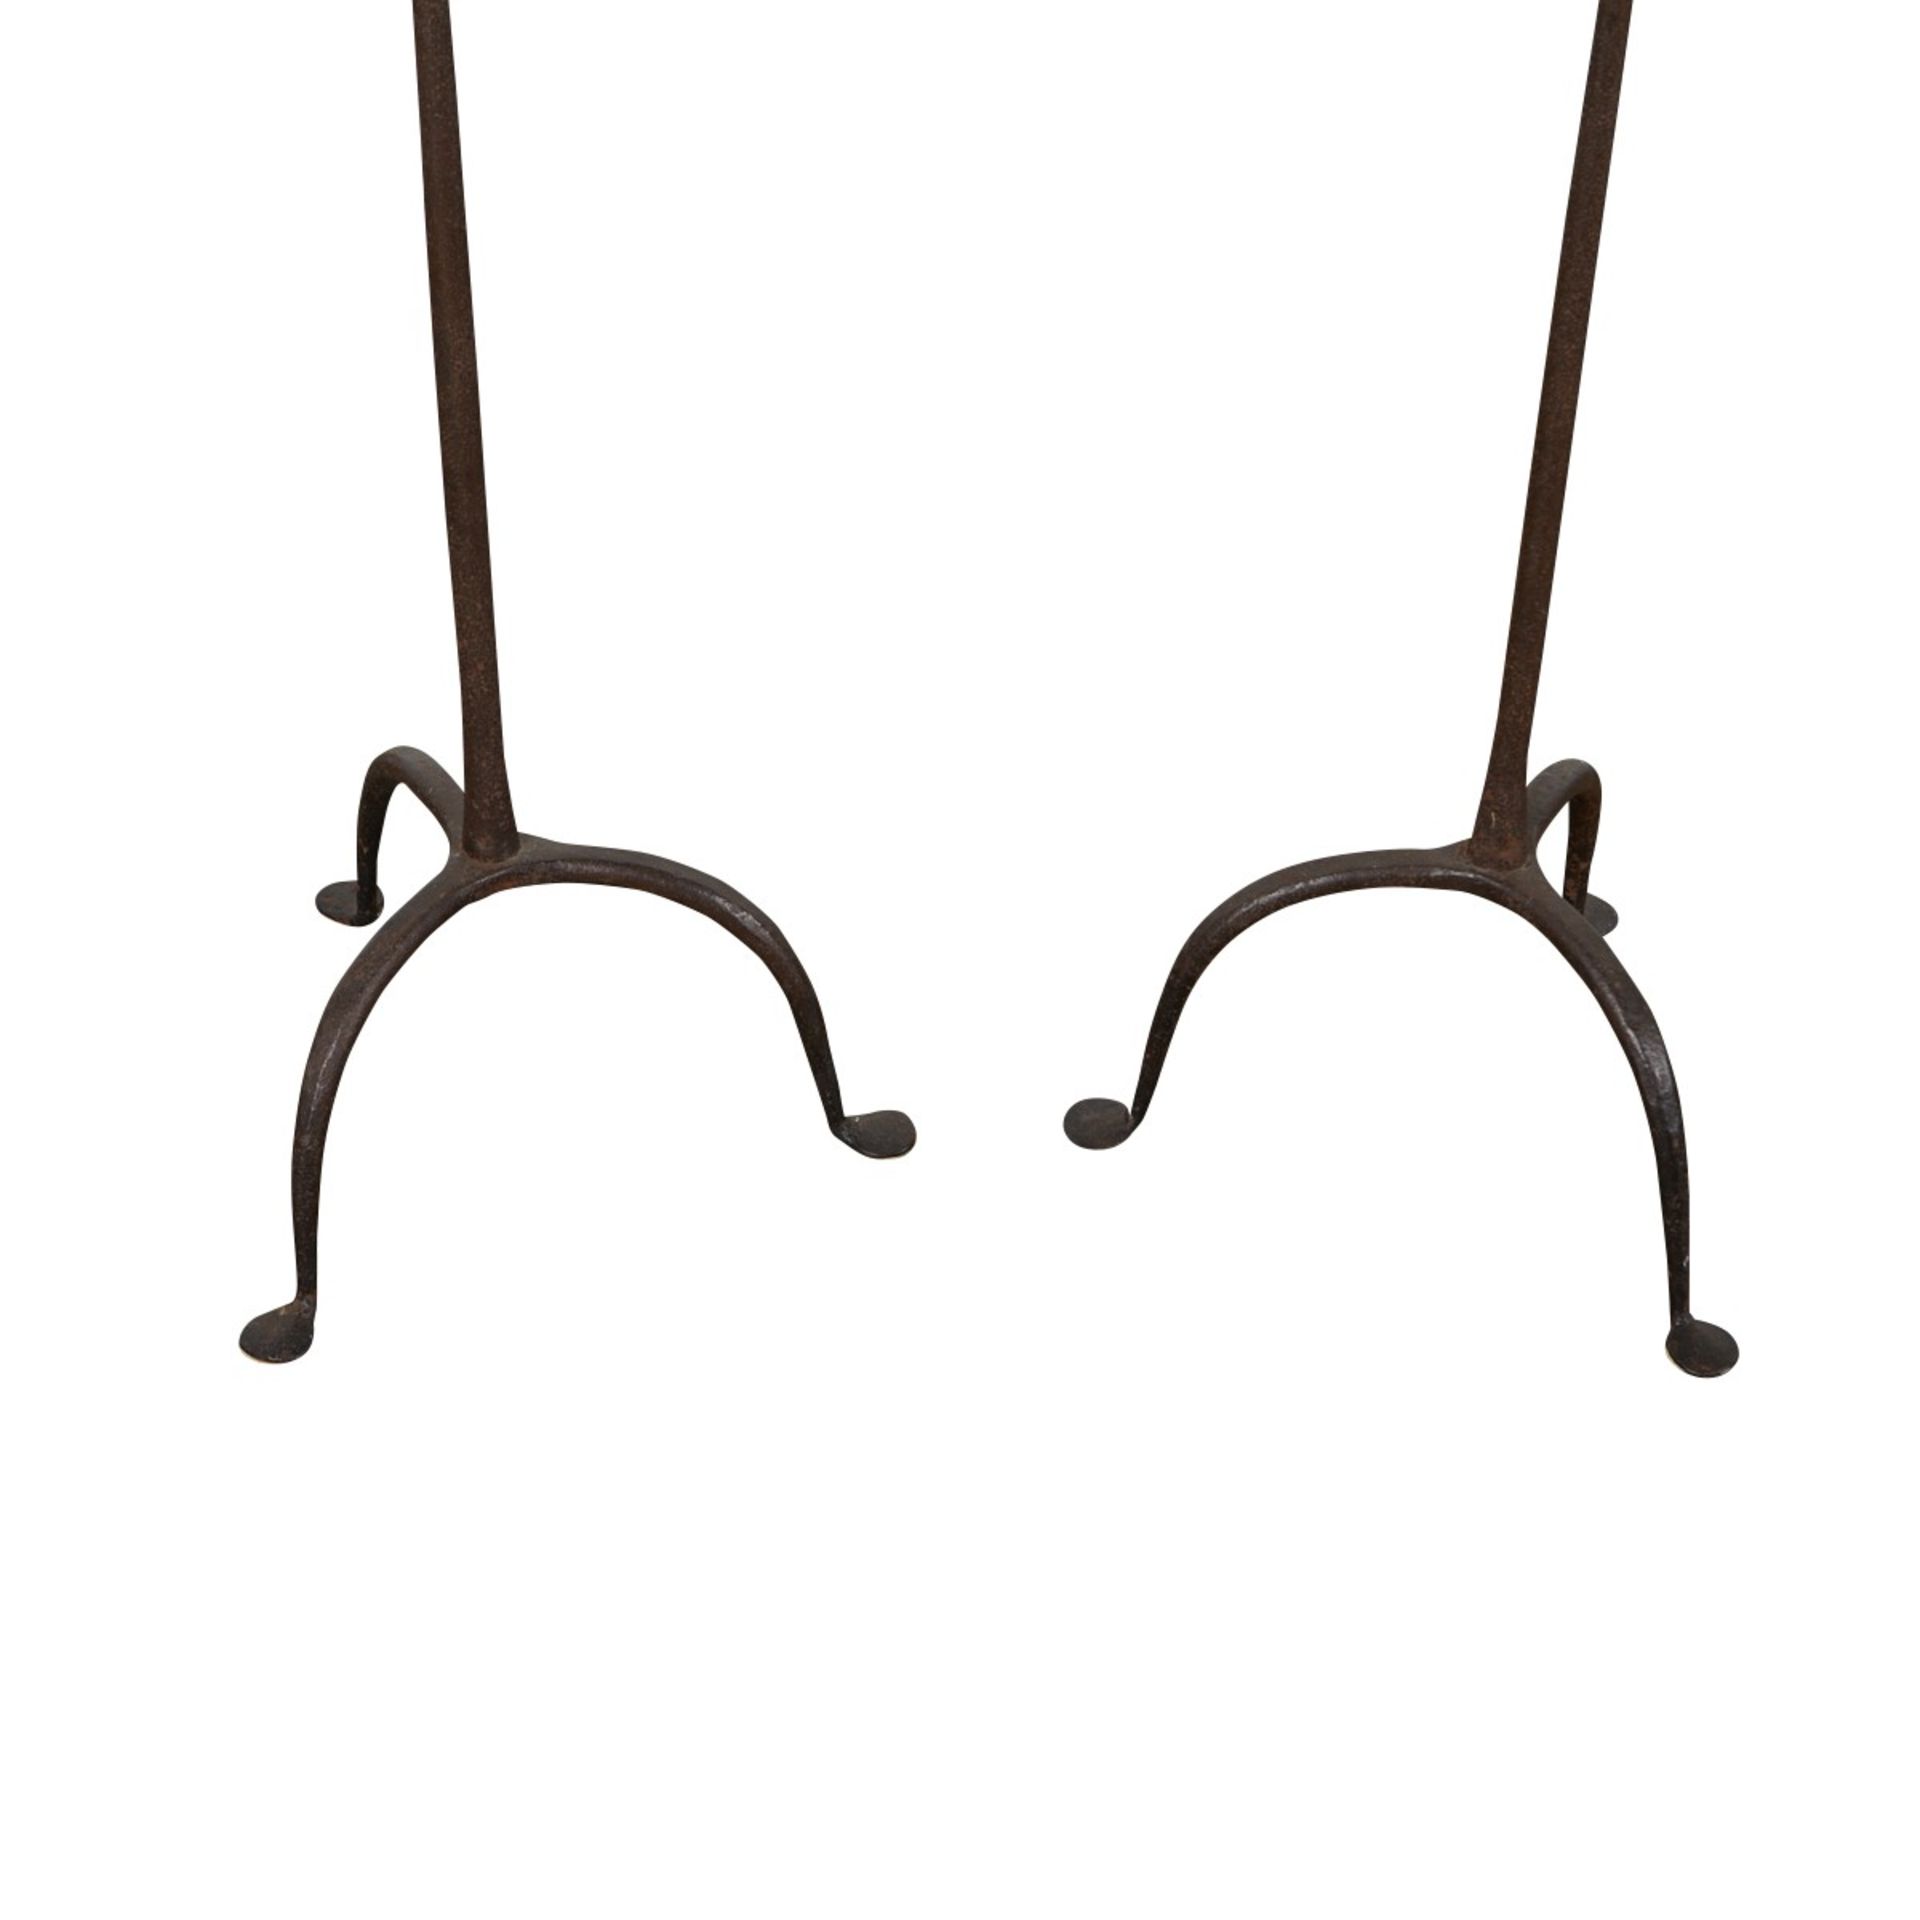 Pair of Wrought Iron Candle Stands - Image 7 of 7